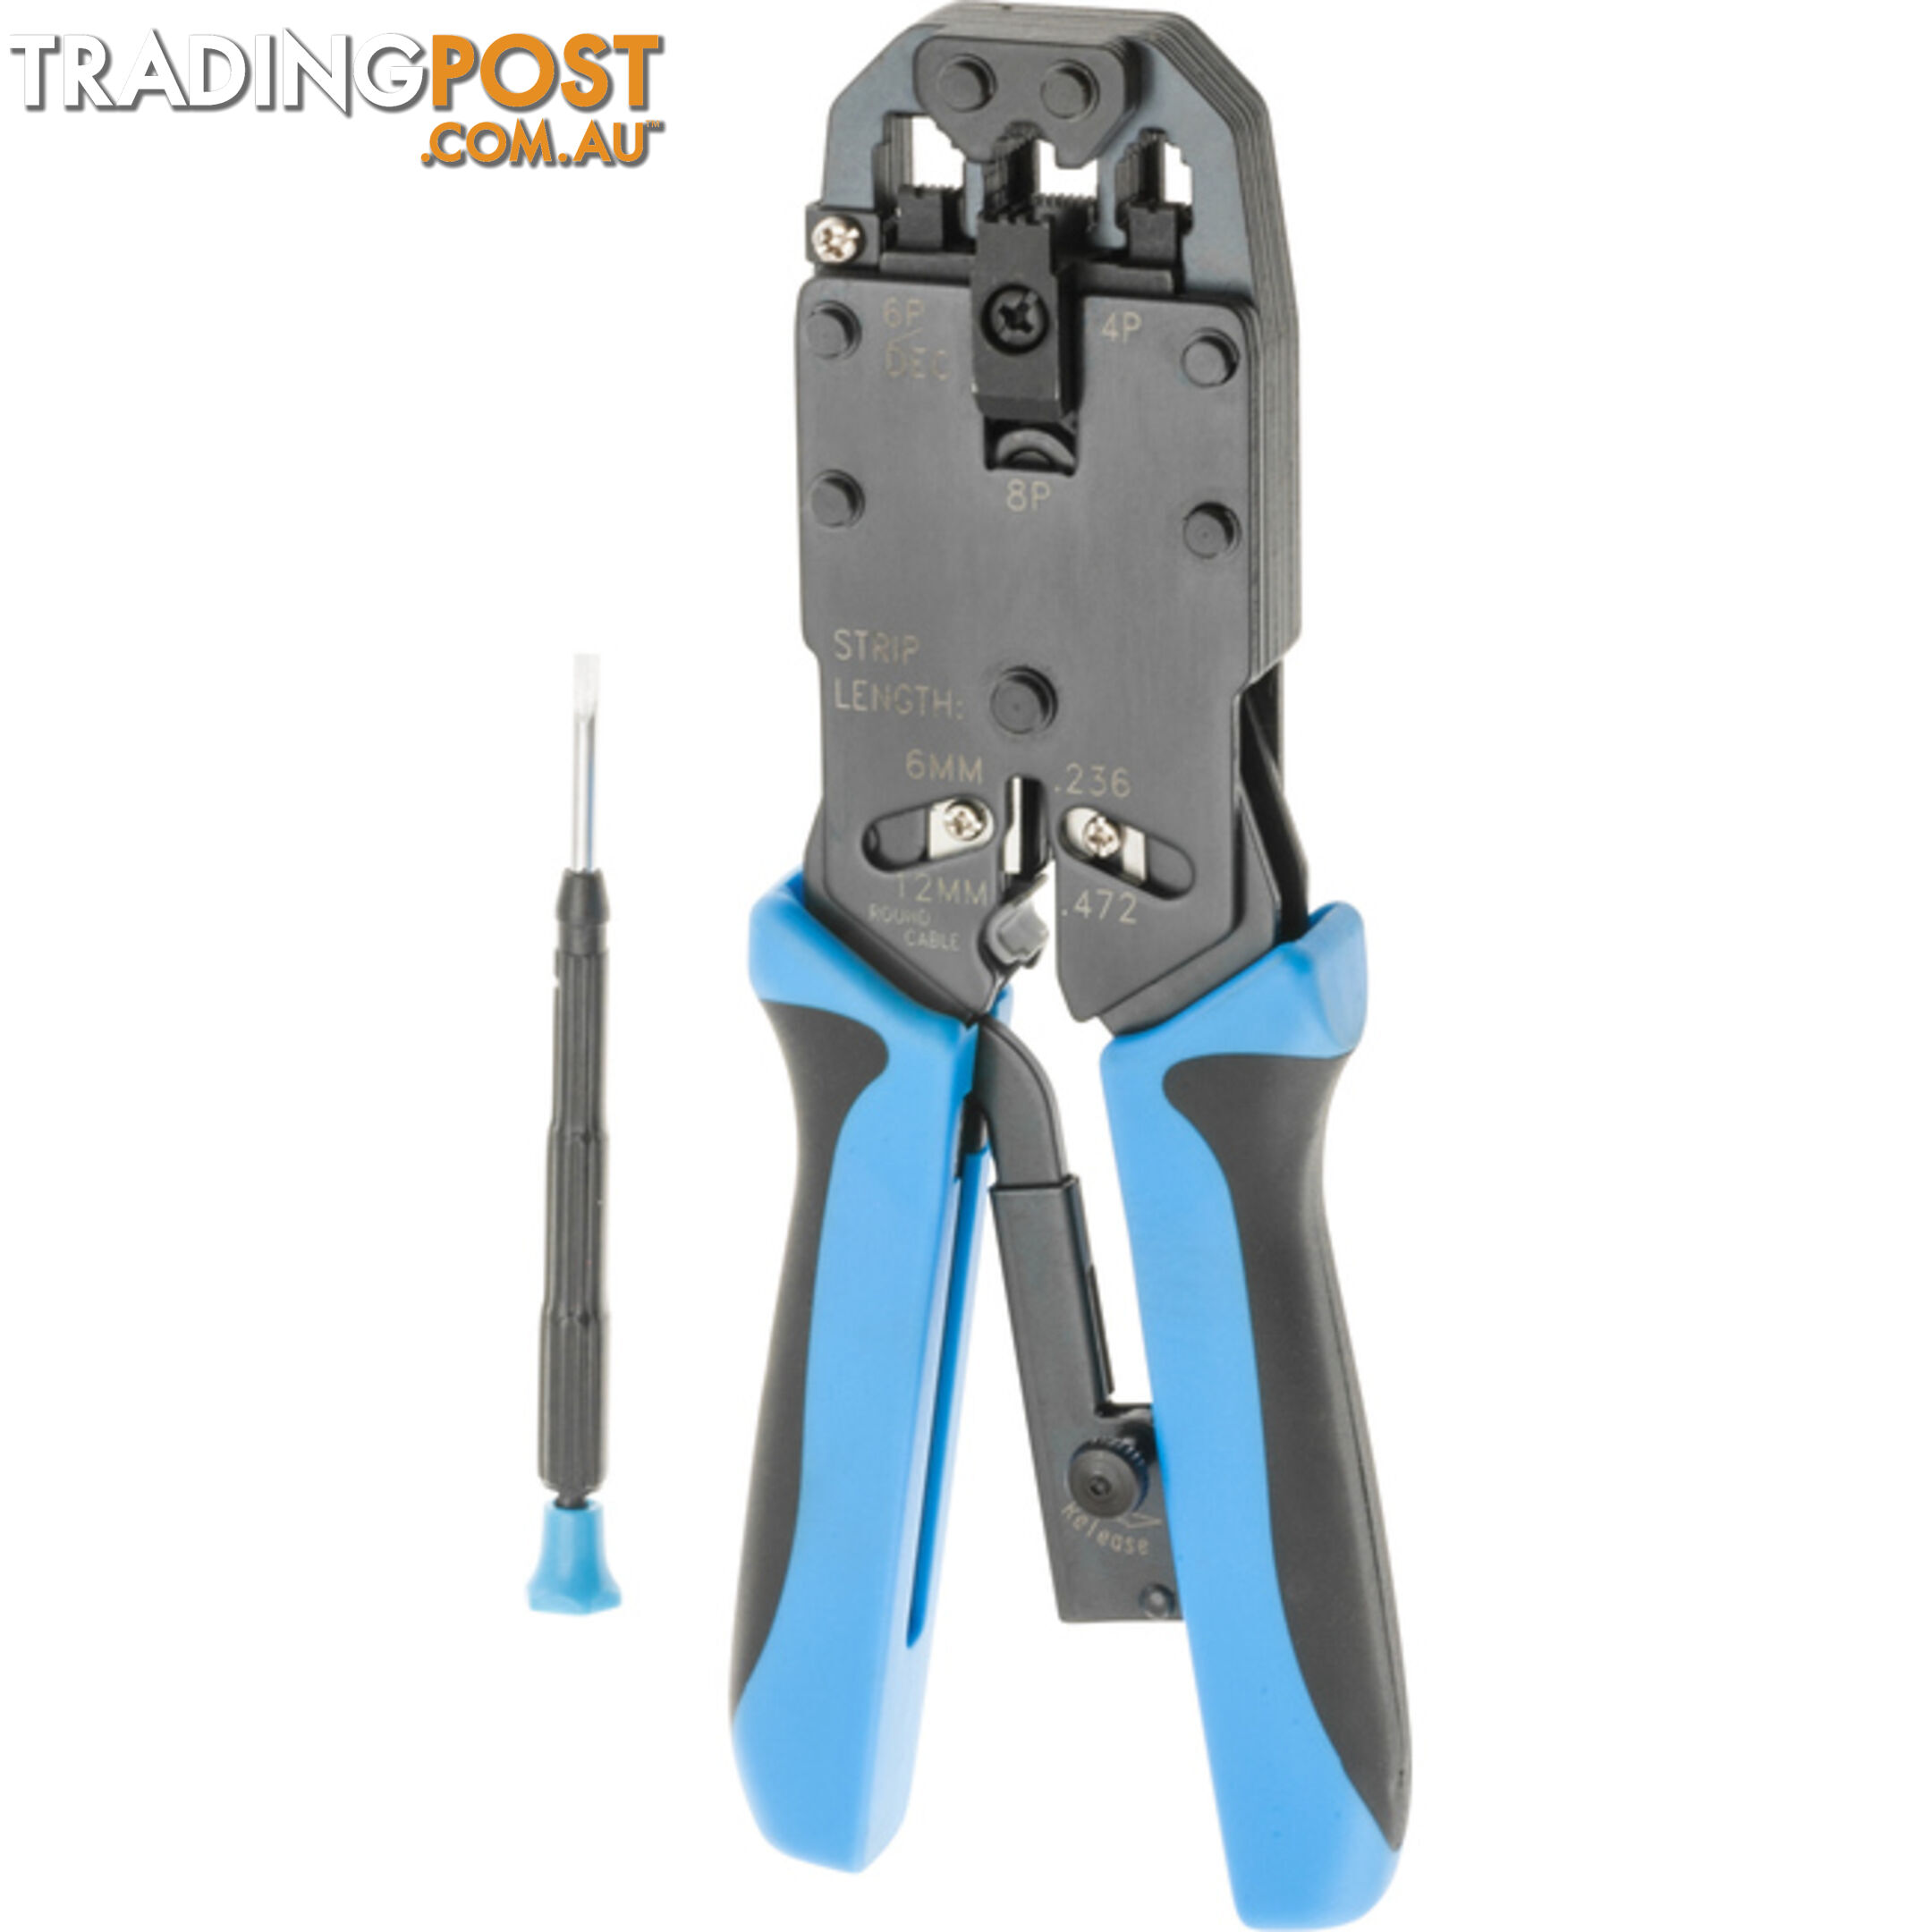 HT2008AR PRO 8.3" MODULAR CRIMPING TOOL WITH RATCHET STRIPPING CUTTING